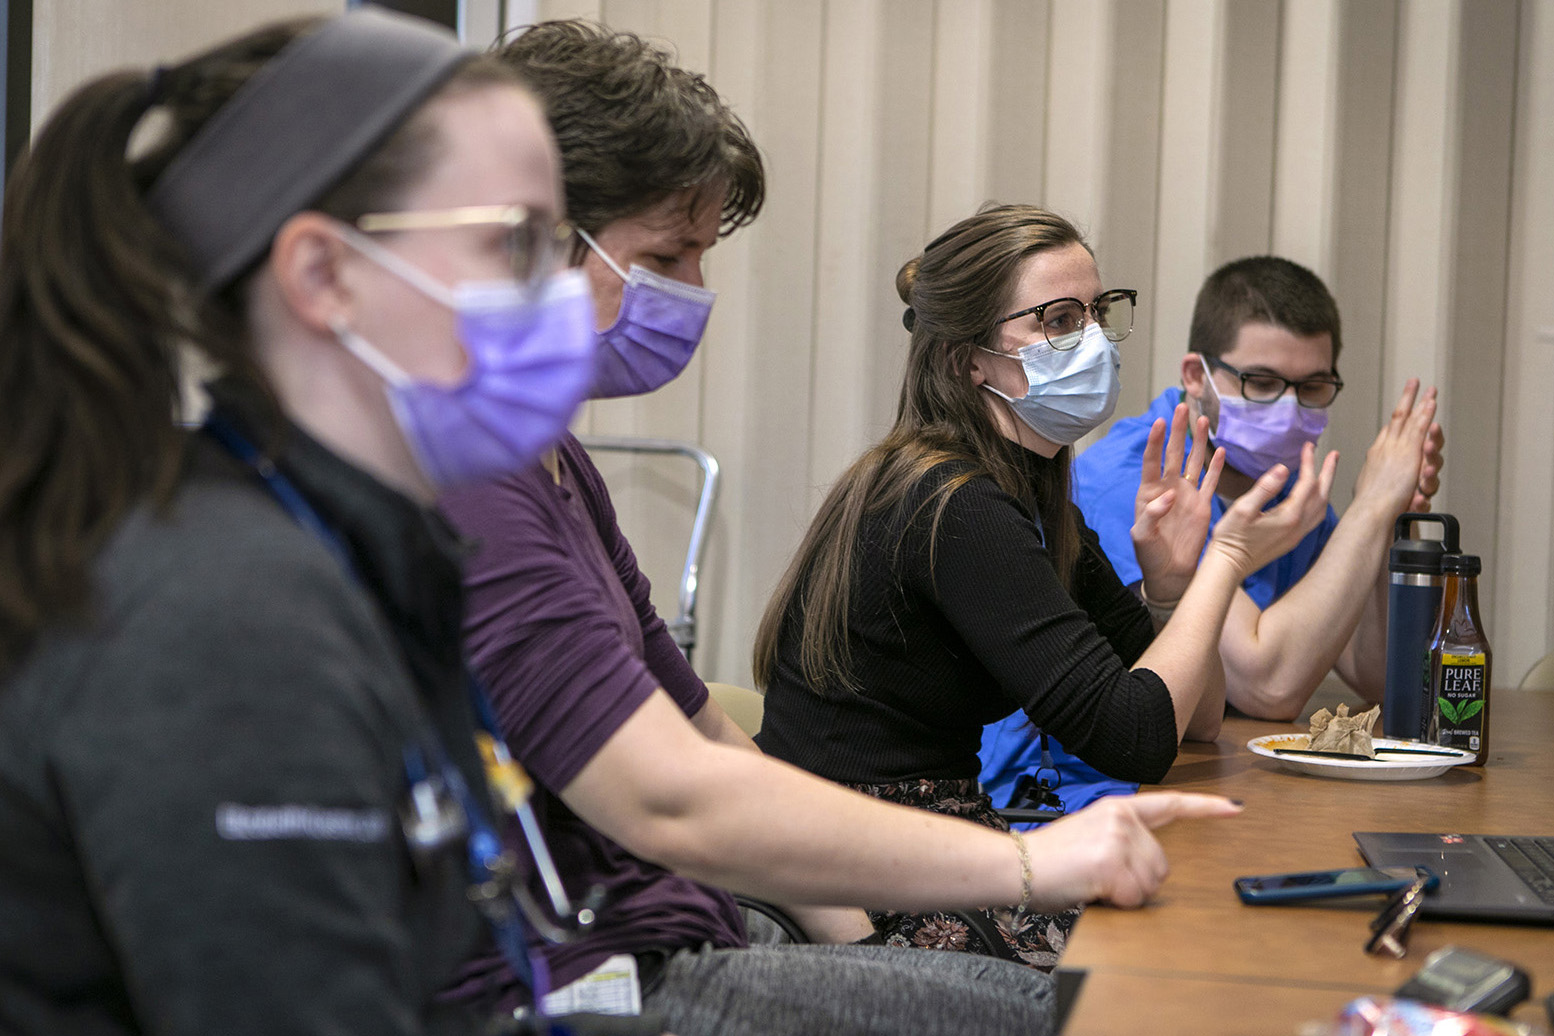 Four residents wearing face masks sit at a table, with the third from the left in focus; she is gesturing and looking ahead.